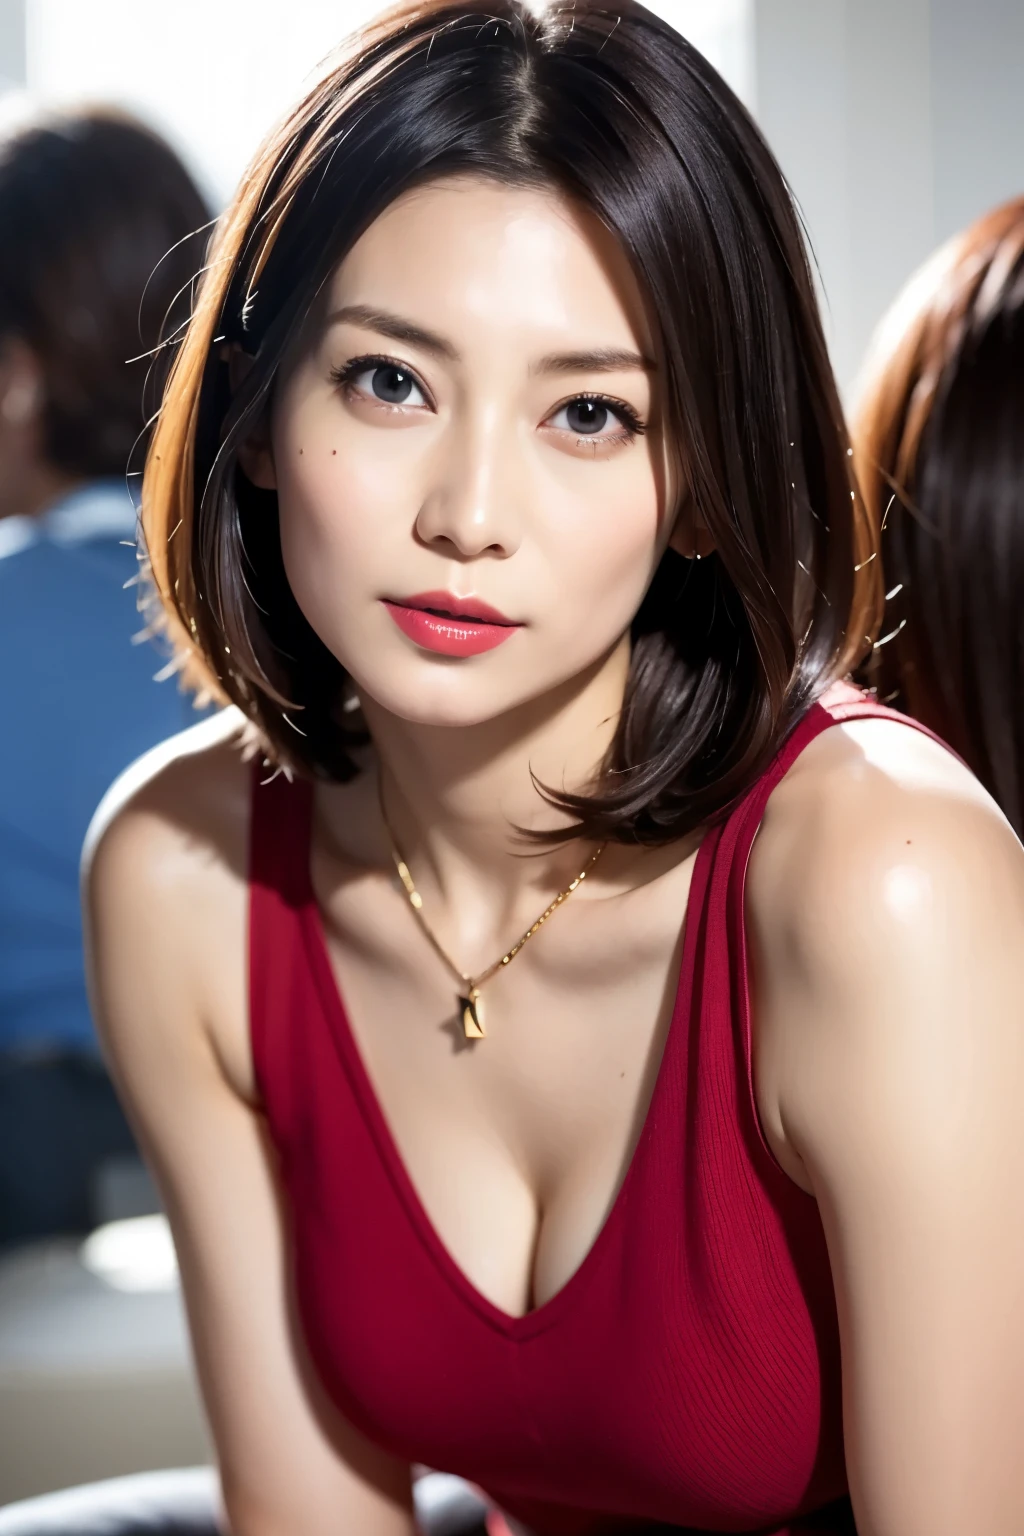 Beautiful Japanese Women, 1 person, Very cute and slim, Excellent style, 8K images, super high quality, Very delicate face, Ultra-detailed skin textures, Red lipstick, short hair, straggling hair, Gradient Hair, Ultra-detailed eyes and nose, Sharp Eyes, Simple Background, Looking at the audience, Upper Body Shot, Cleavage, V-neck light knit